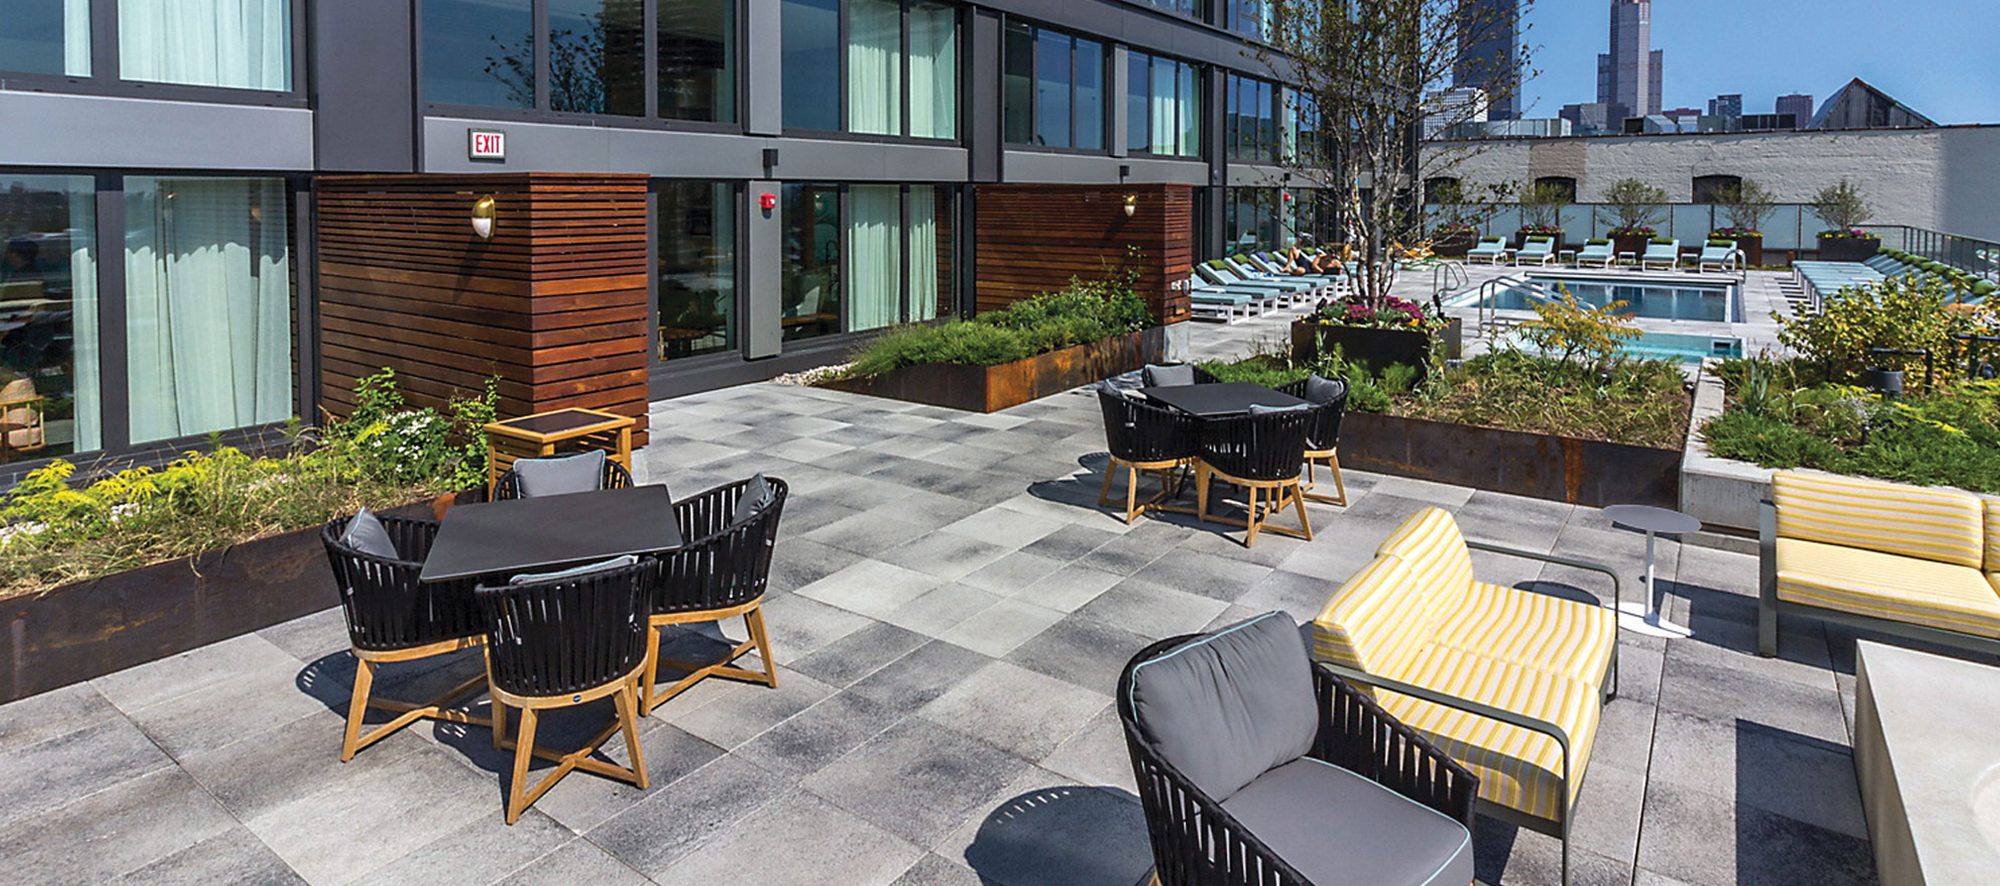 A roof deck overlooking the Chicago skyline features grey speckled Umbriano slabs and outdoor amenities including a pool and lounge area.